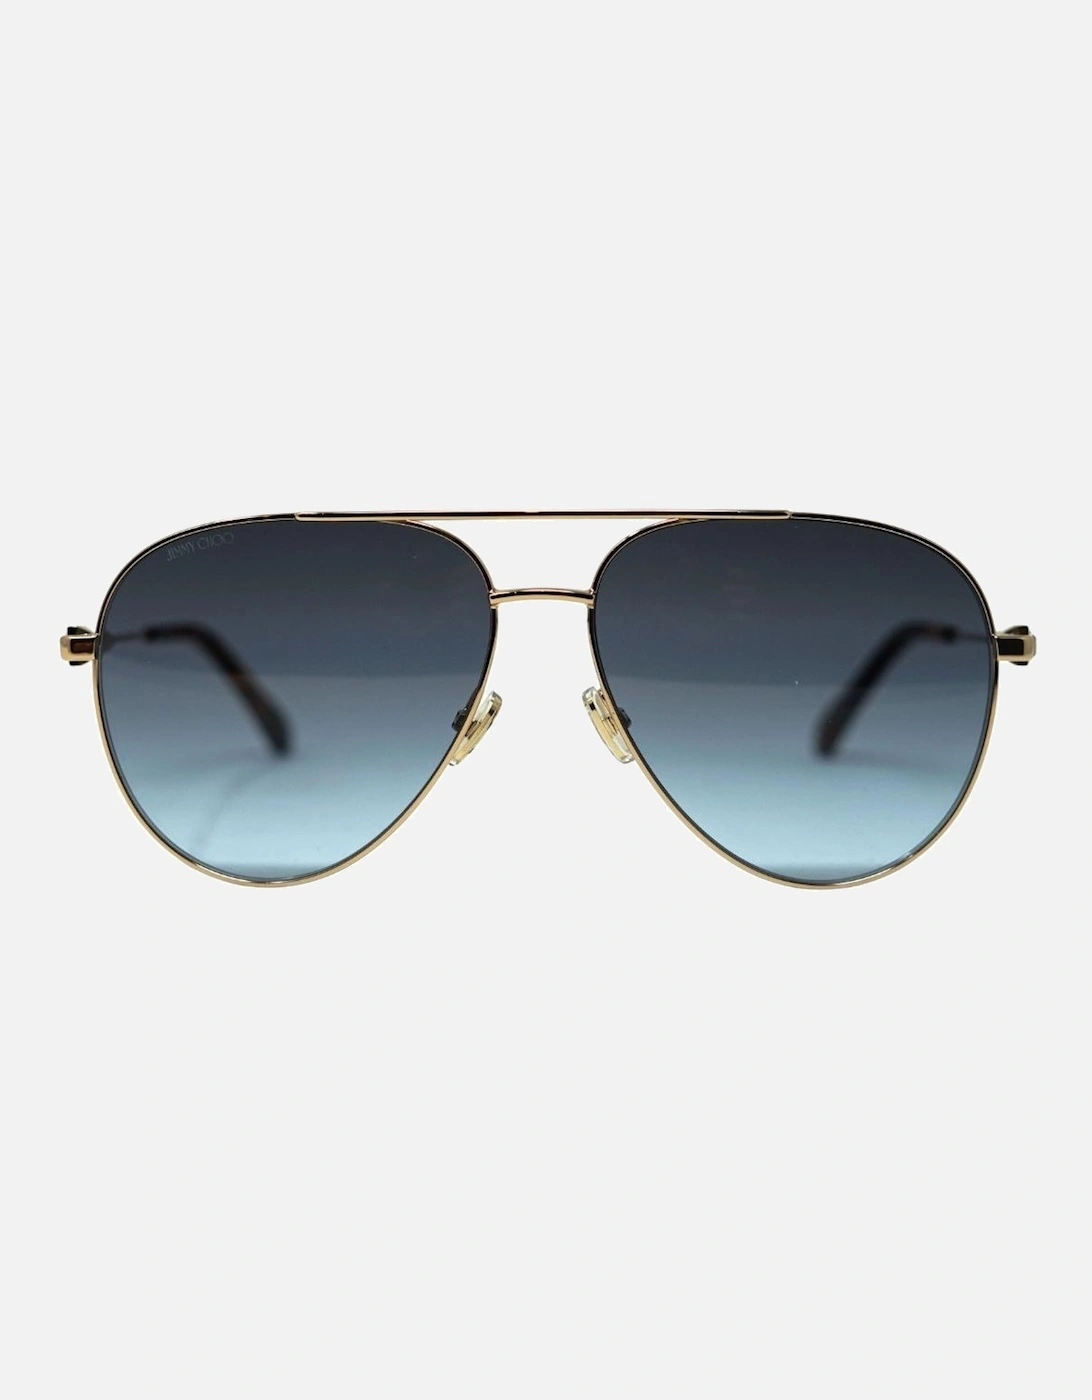 Olly/S 000 GB Gold Sunglasses, 4 of 3